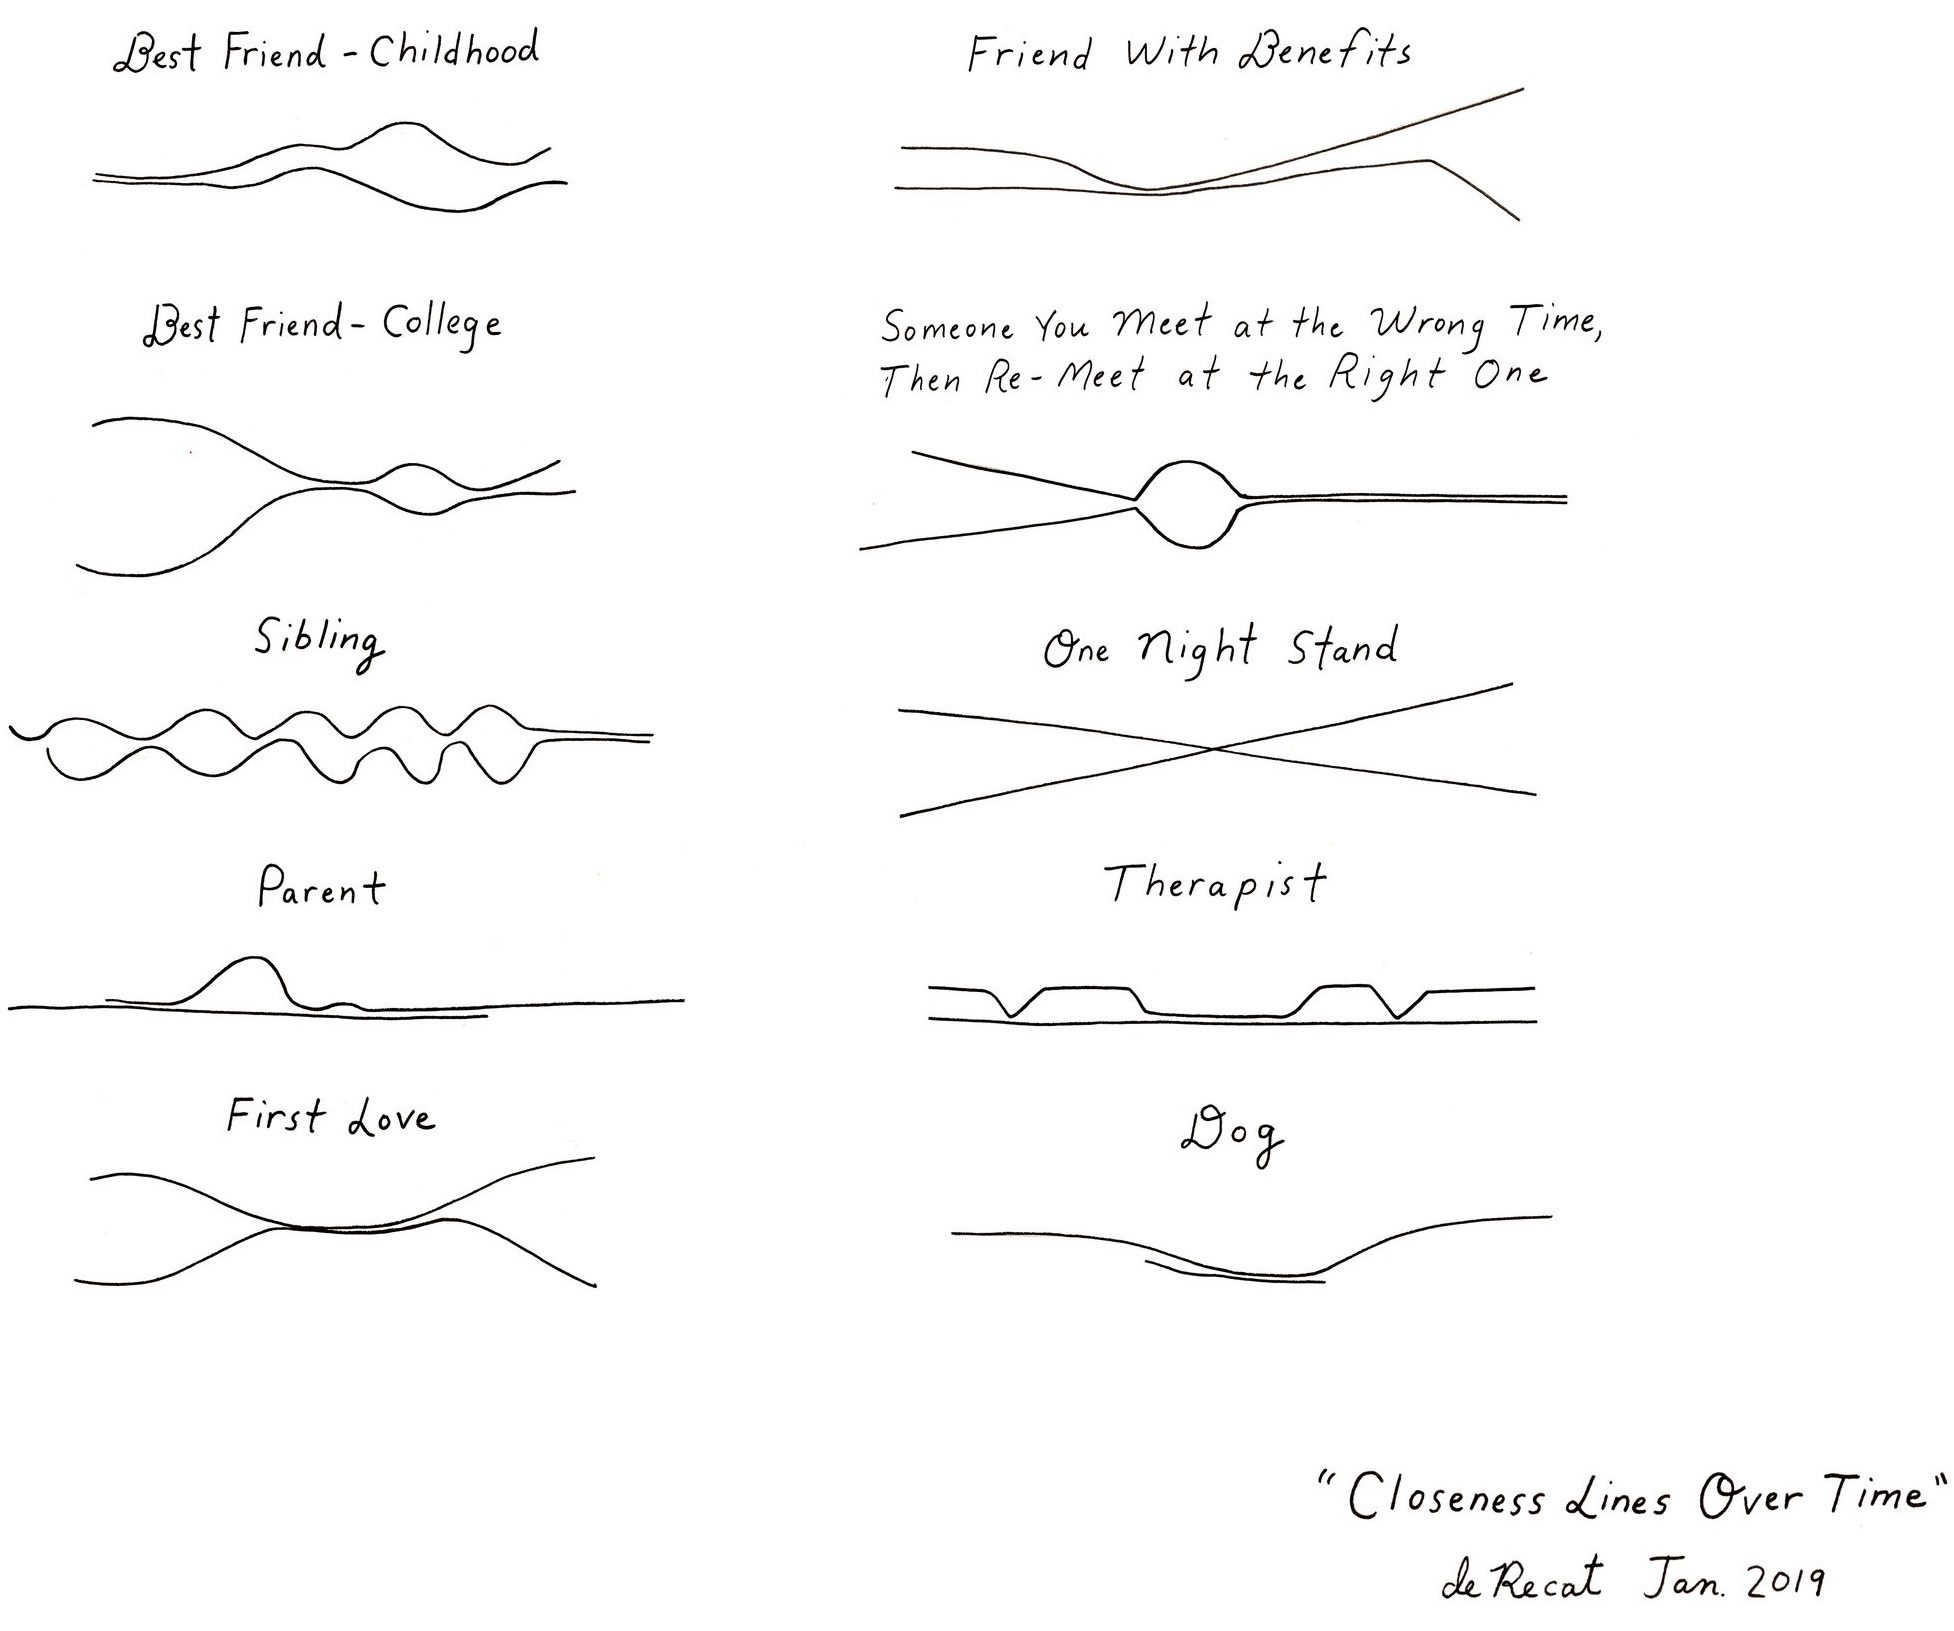 Closeness In Relationships Over Time Illustrated With A Couple Of Lines Flowingdata